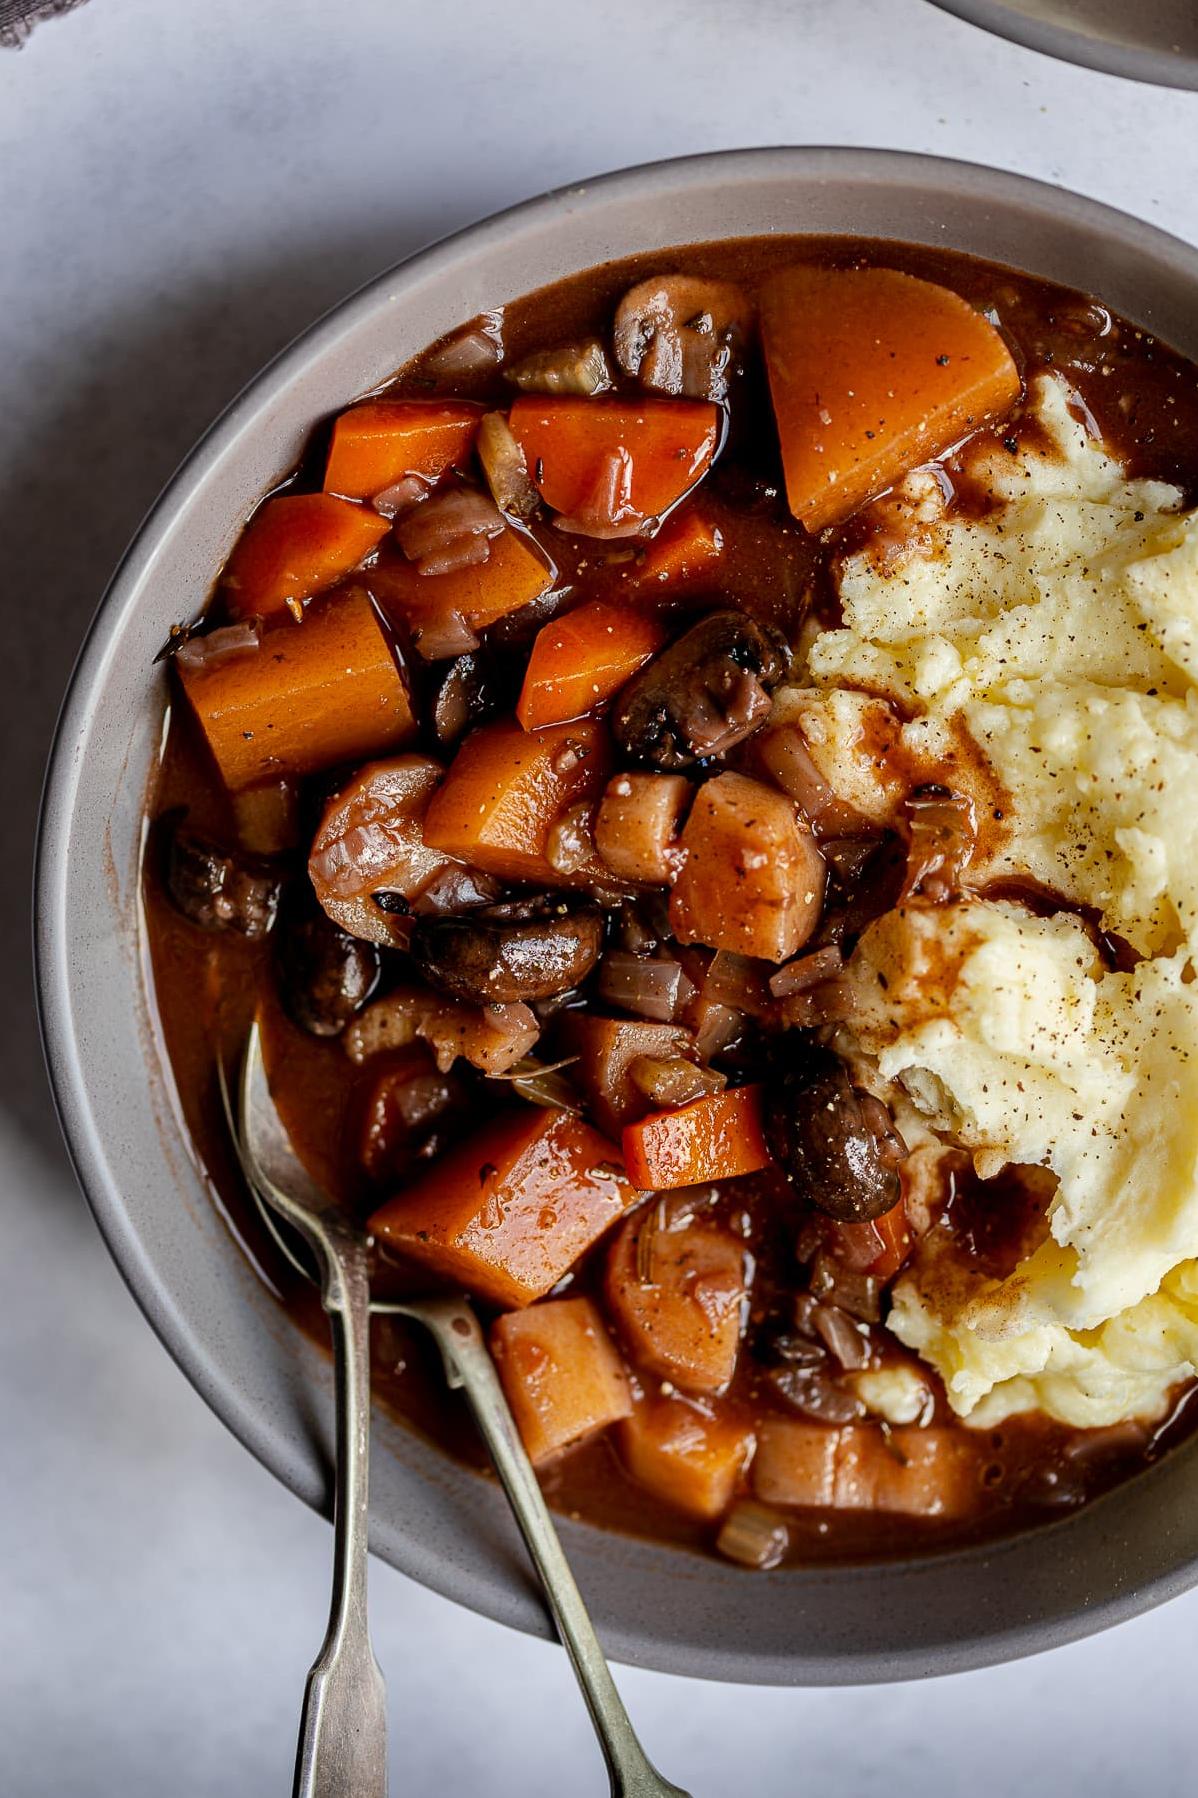  Say goodbye to boring vegetables with this tasty and comforting stew.